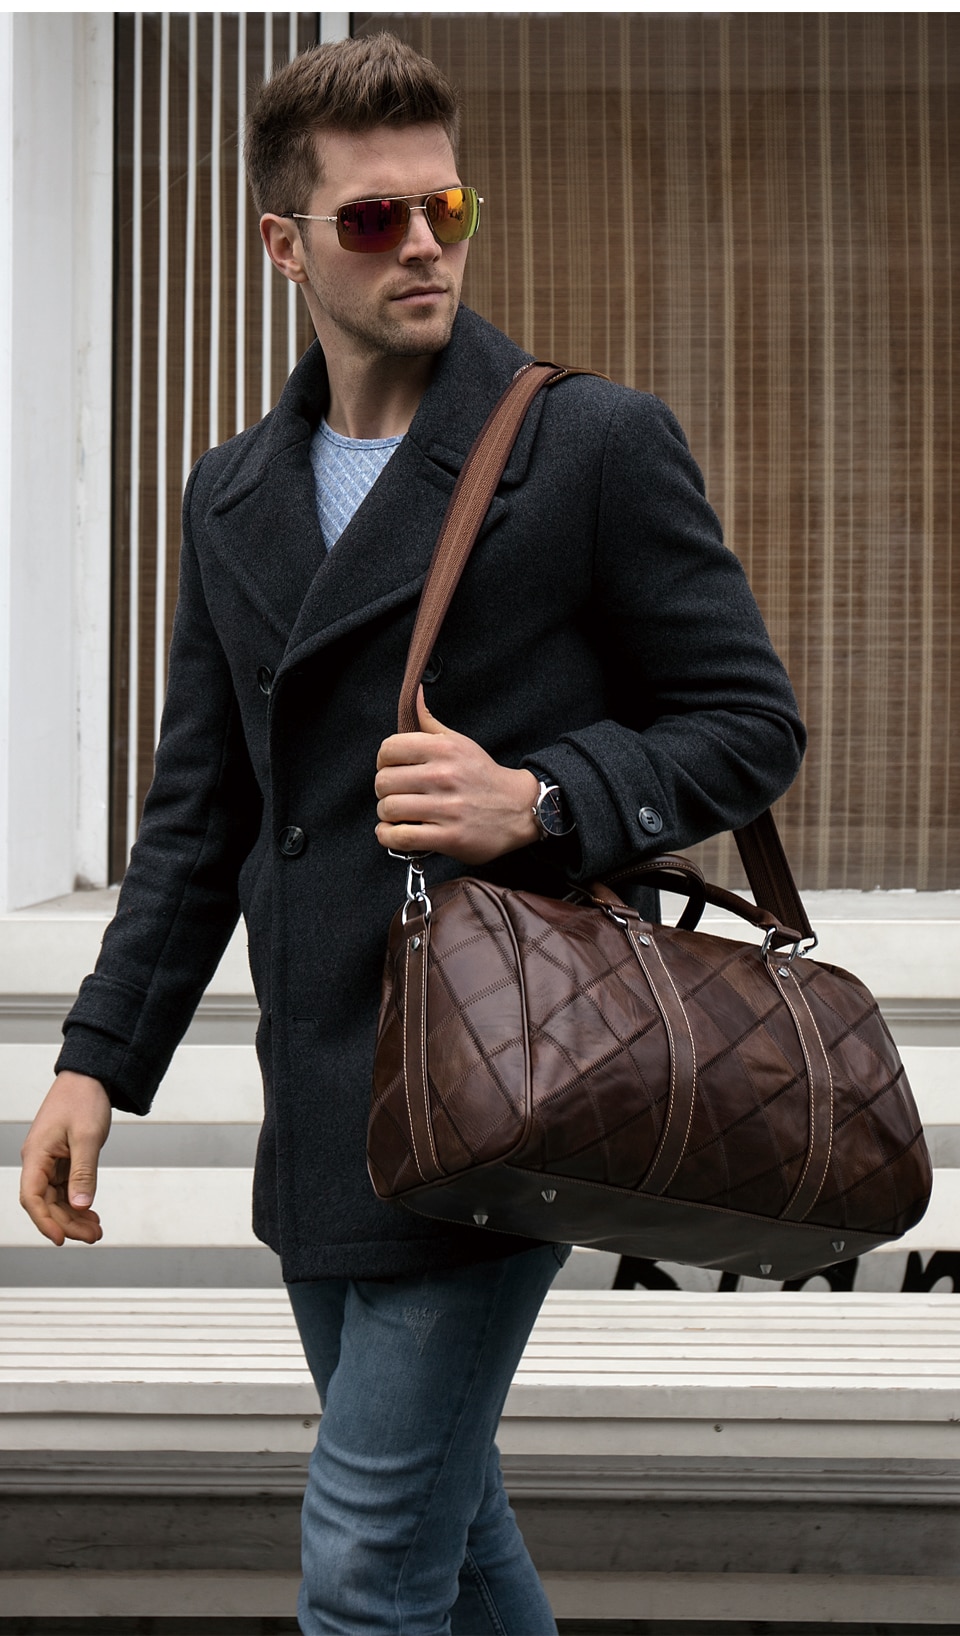 WESTAL-Mens-Luggage-Travel-Bags-Genuine-Leather-Duffle-Bag-Suitcase-and-Travel-Tote-Carry-on-Luggage-32798190847